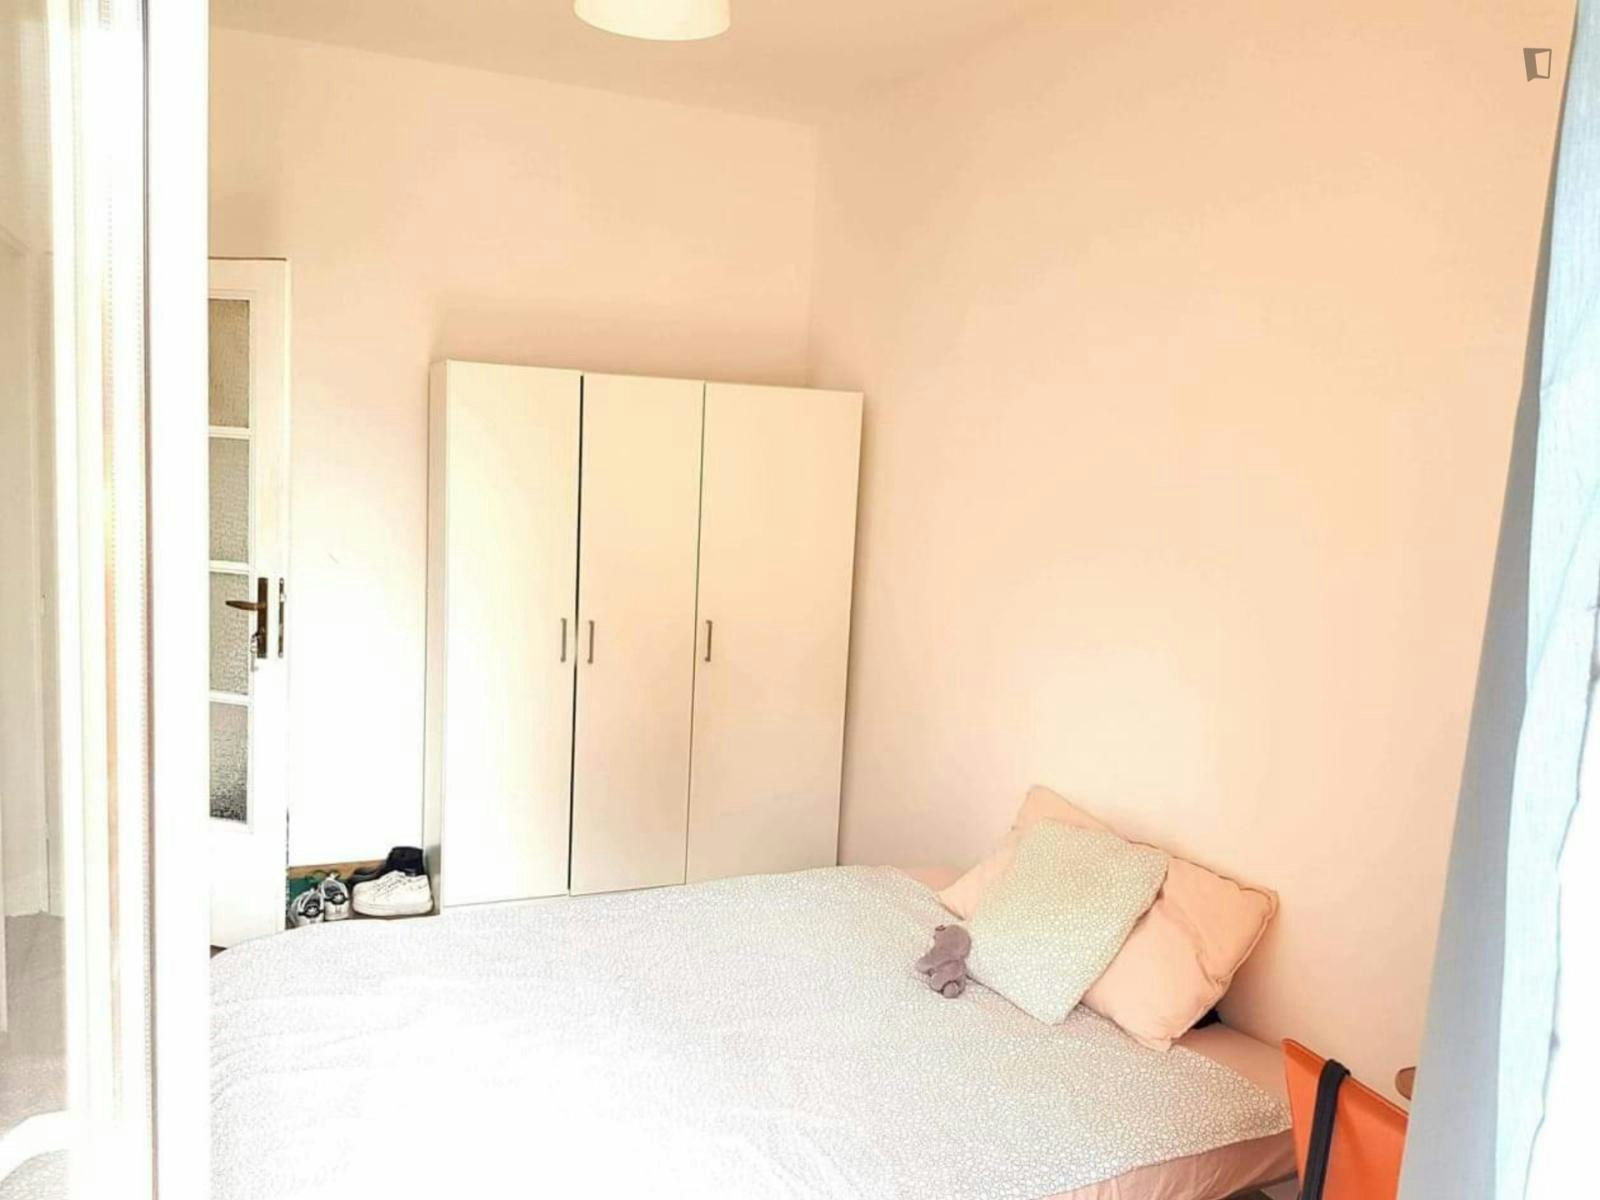 Nice double bedroom with balcony in a 3-bedroom apartment, in Kazimierz